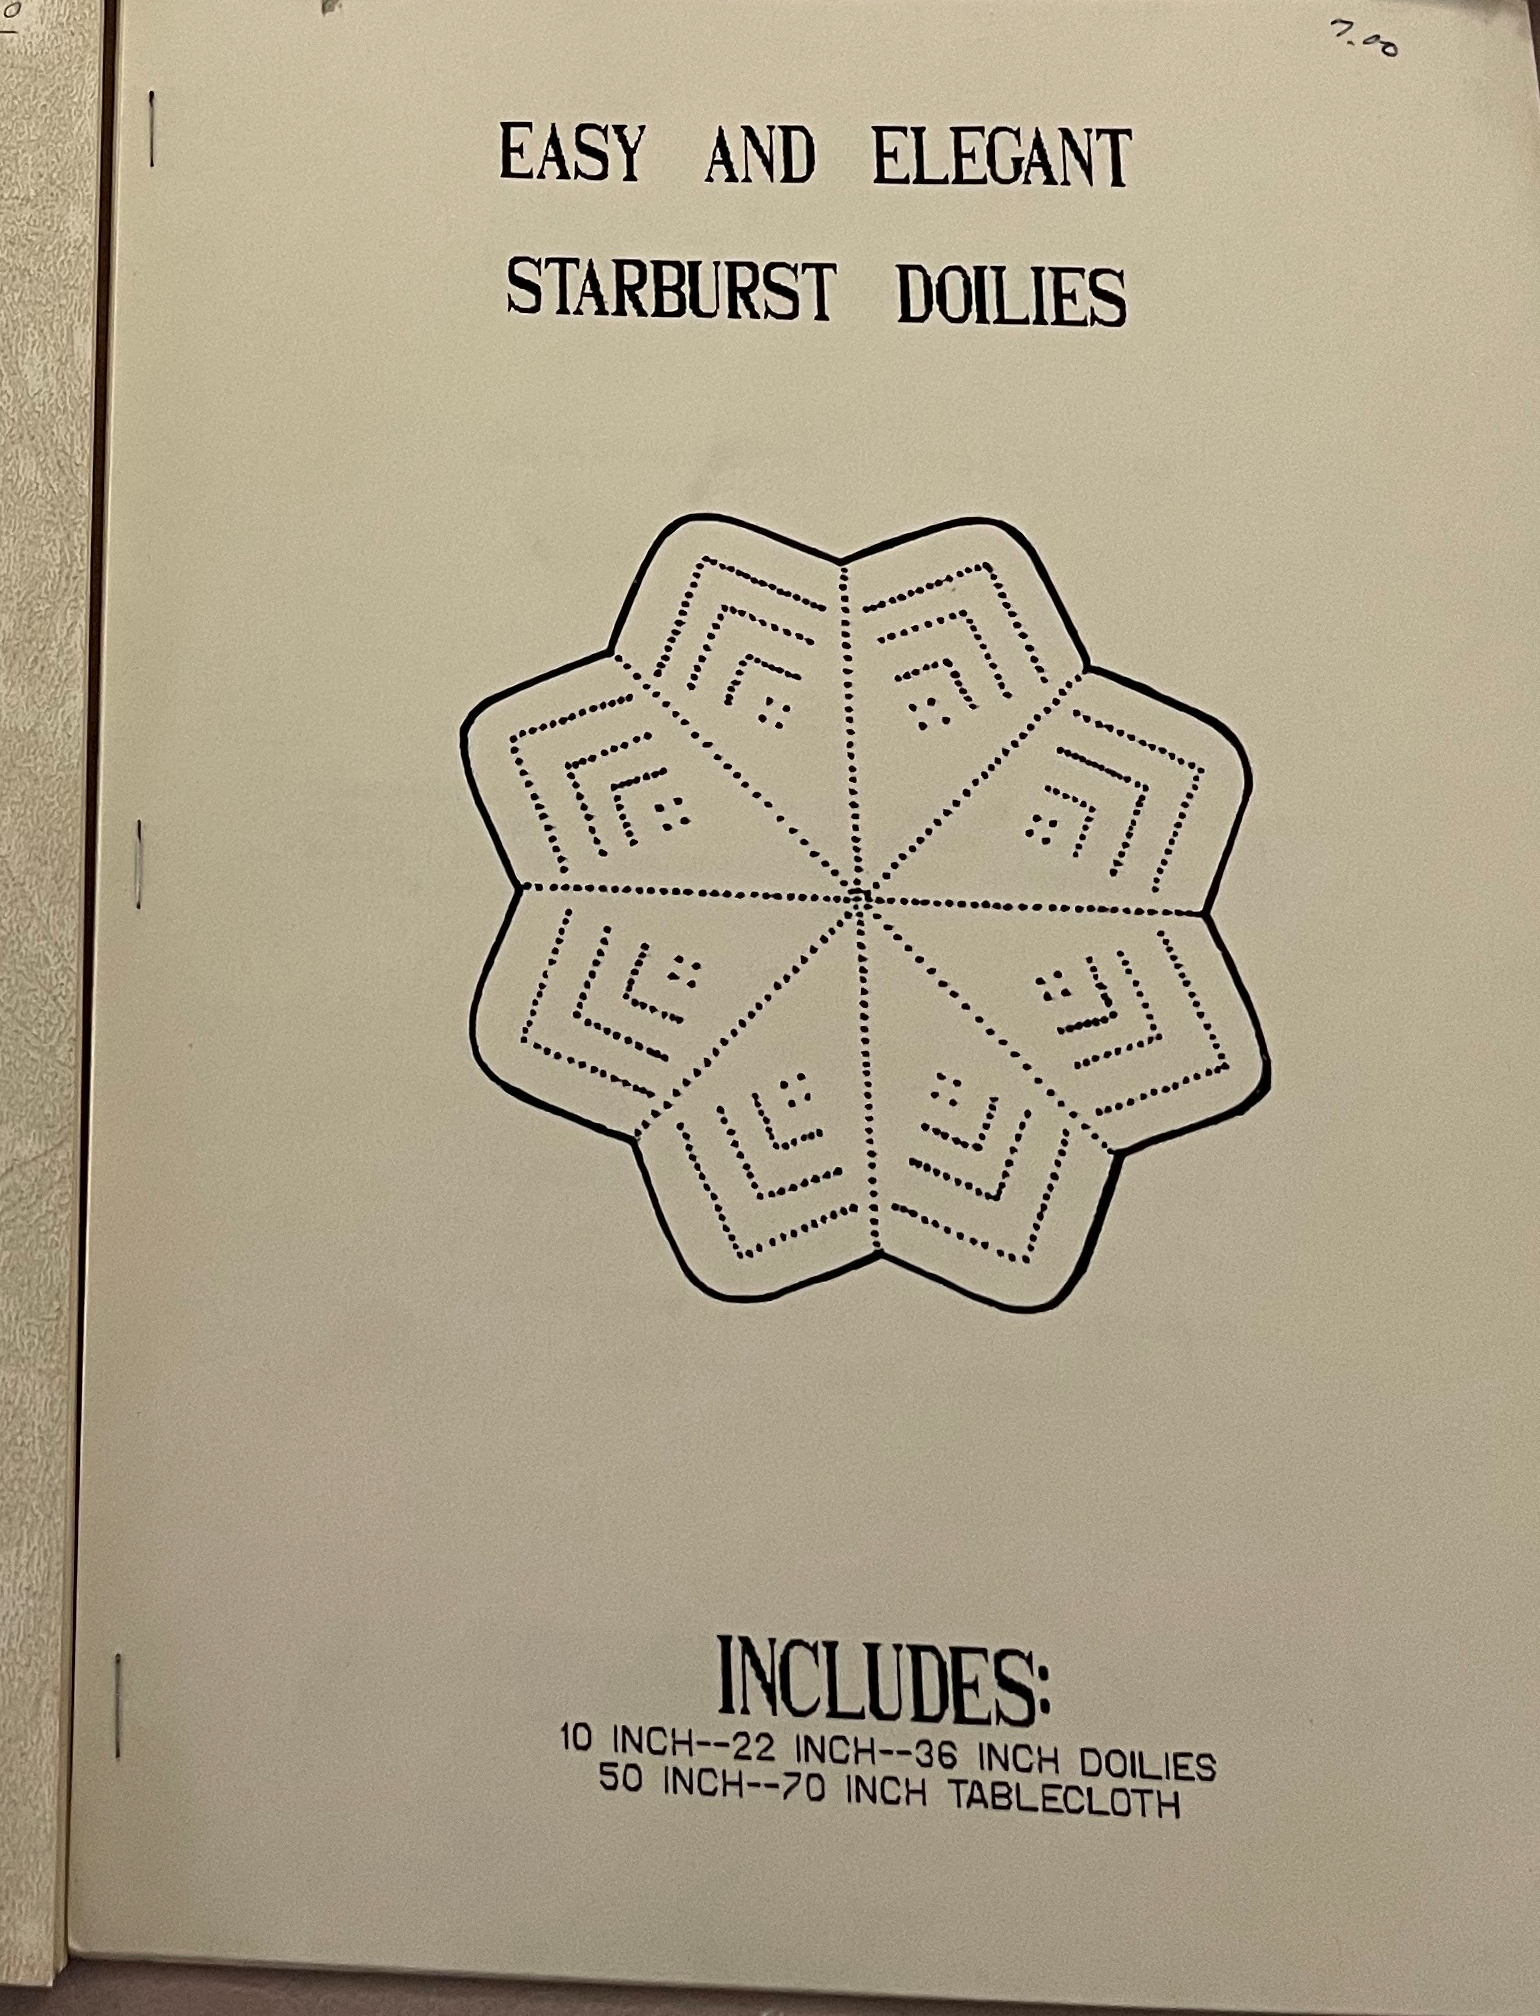 Easy and Elegant Starburst Doiles: Includes 10, 22, and 36 inch dolies and 50 and 70 inch tablecloths